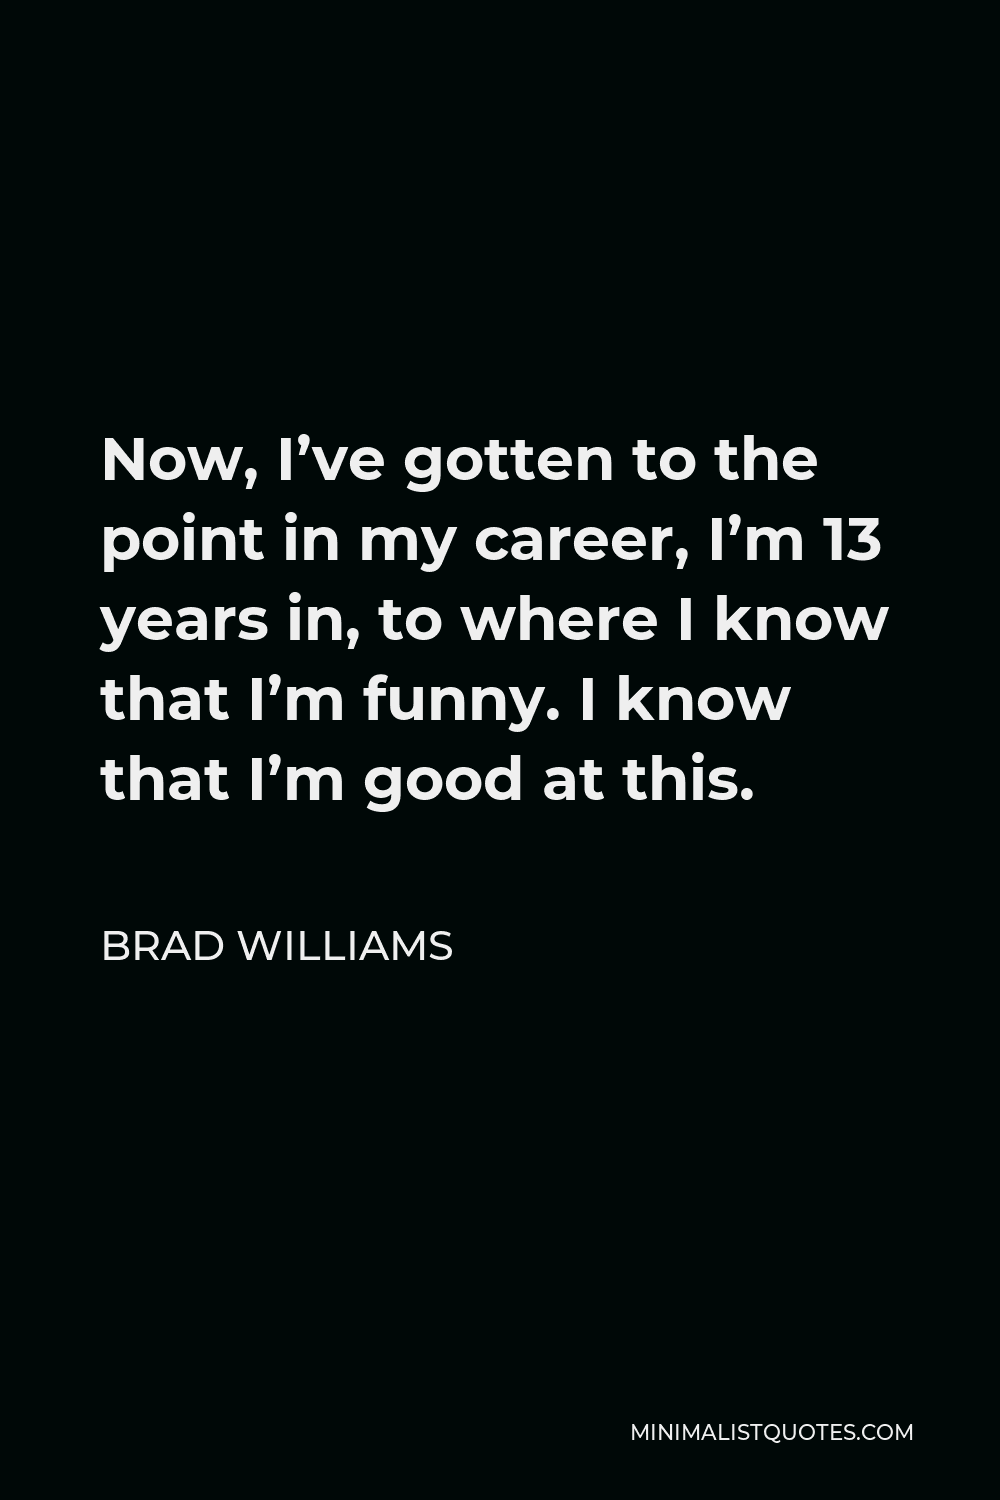 Brad Williams Quote - Now, I’ve gotten to the point in my career, I’m 13 years in, to where I know that I’m funny. I know that I’m good at this.